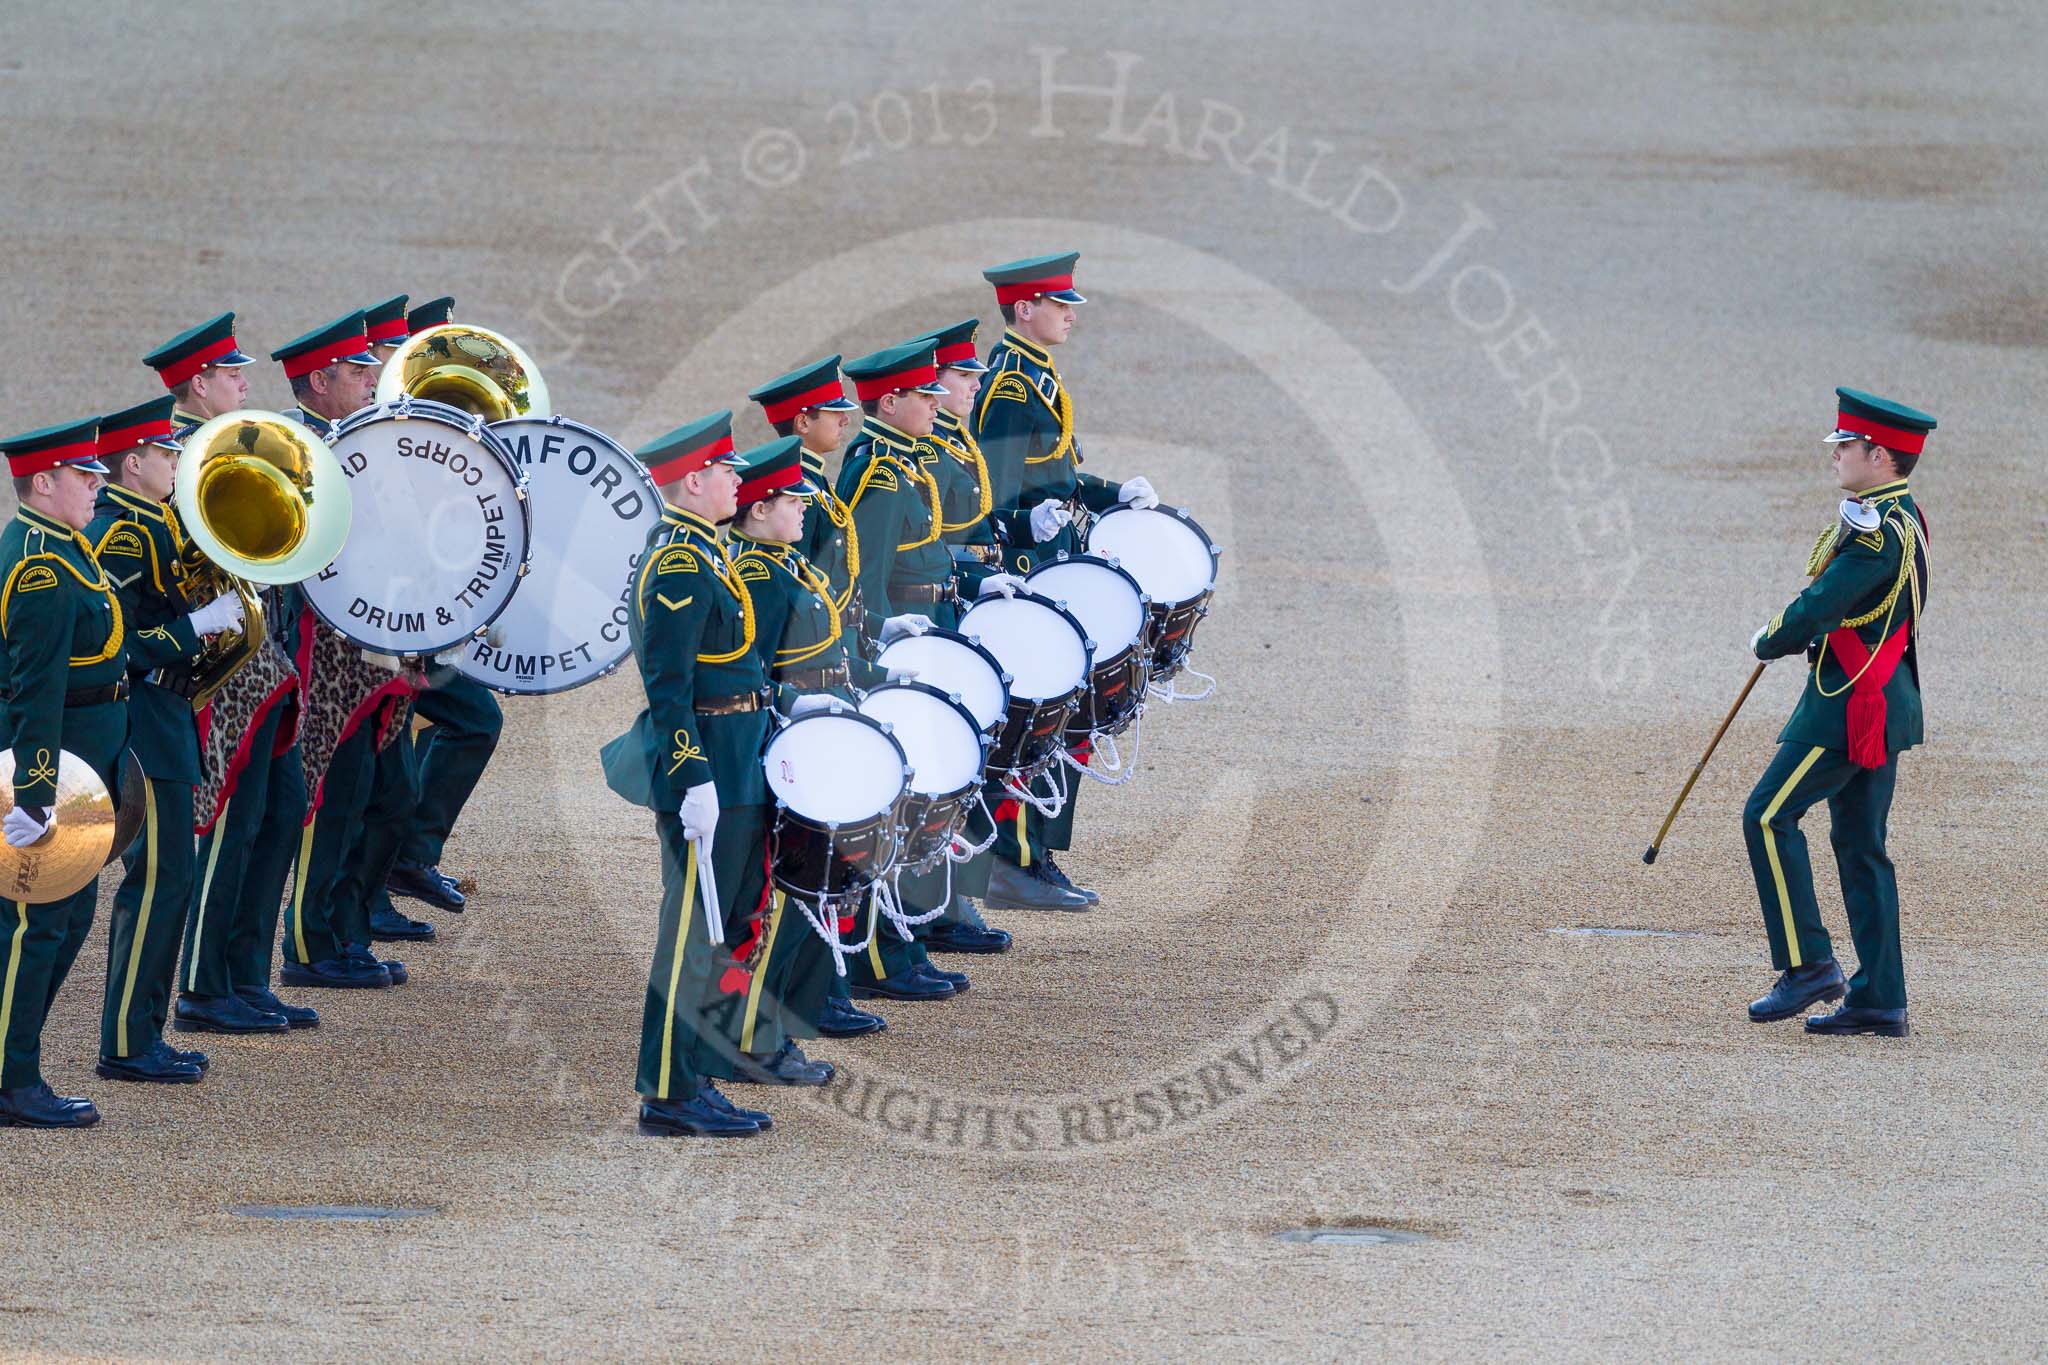 Beating Retreat 2015 - Waterloo 200: Romford Drum & Trumpet Corps, a youth military style marching band, starts the event with an excellent performance..
Horse Guards Parade, Westminster,
London,

United Kingdom,
on 10 June 2015 at 19:41, image #40